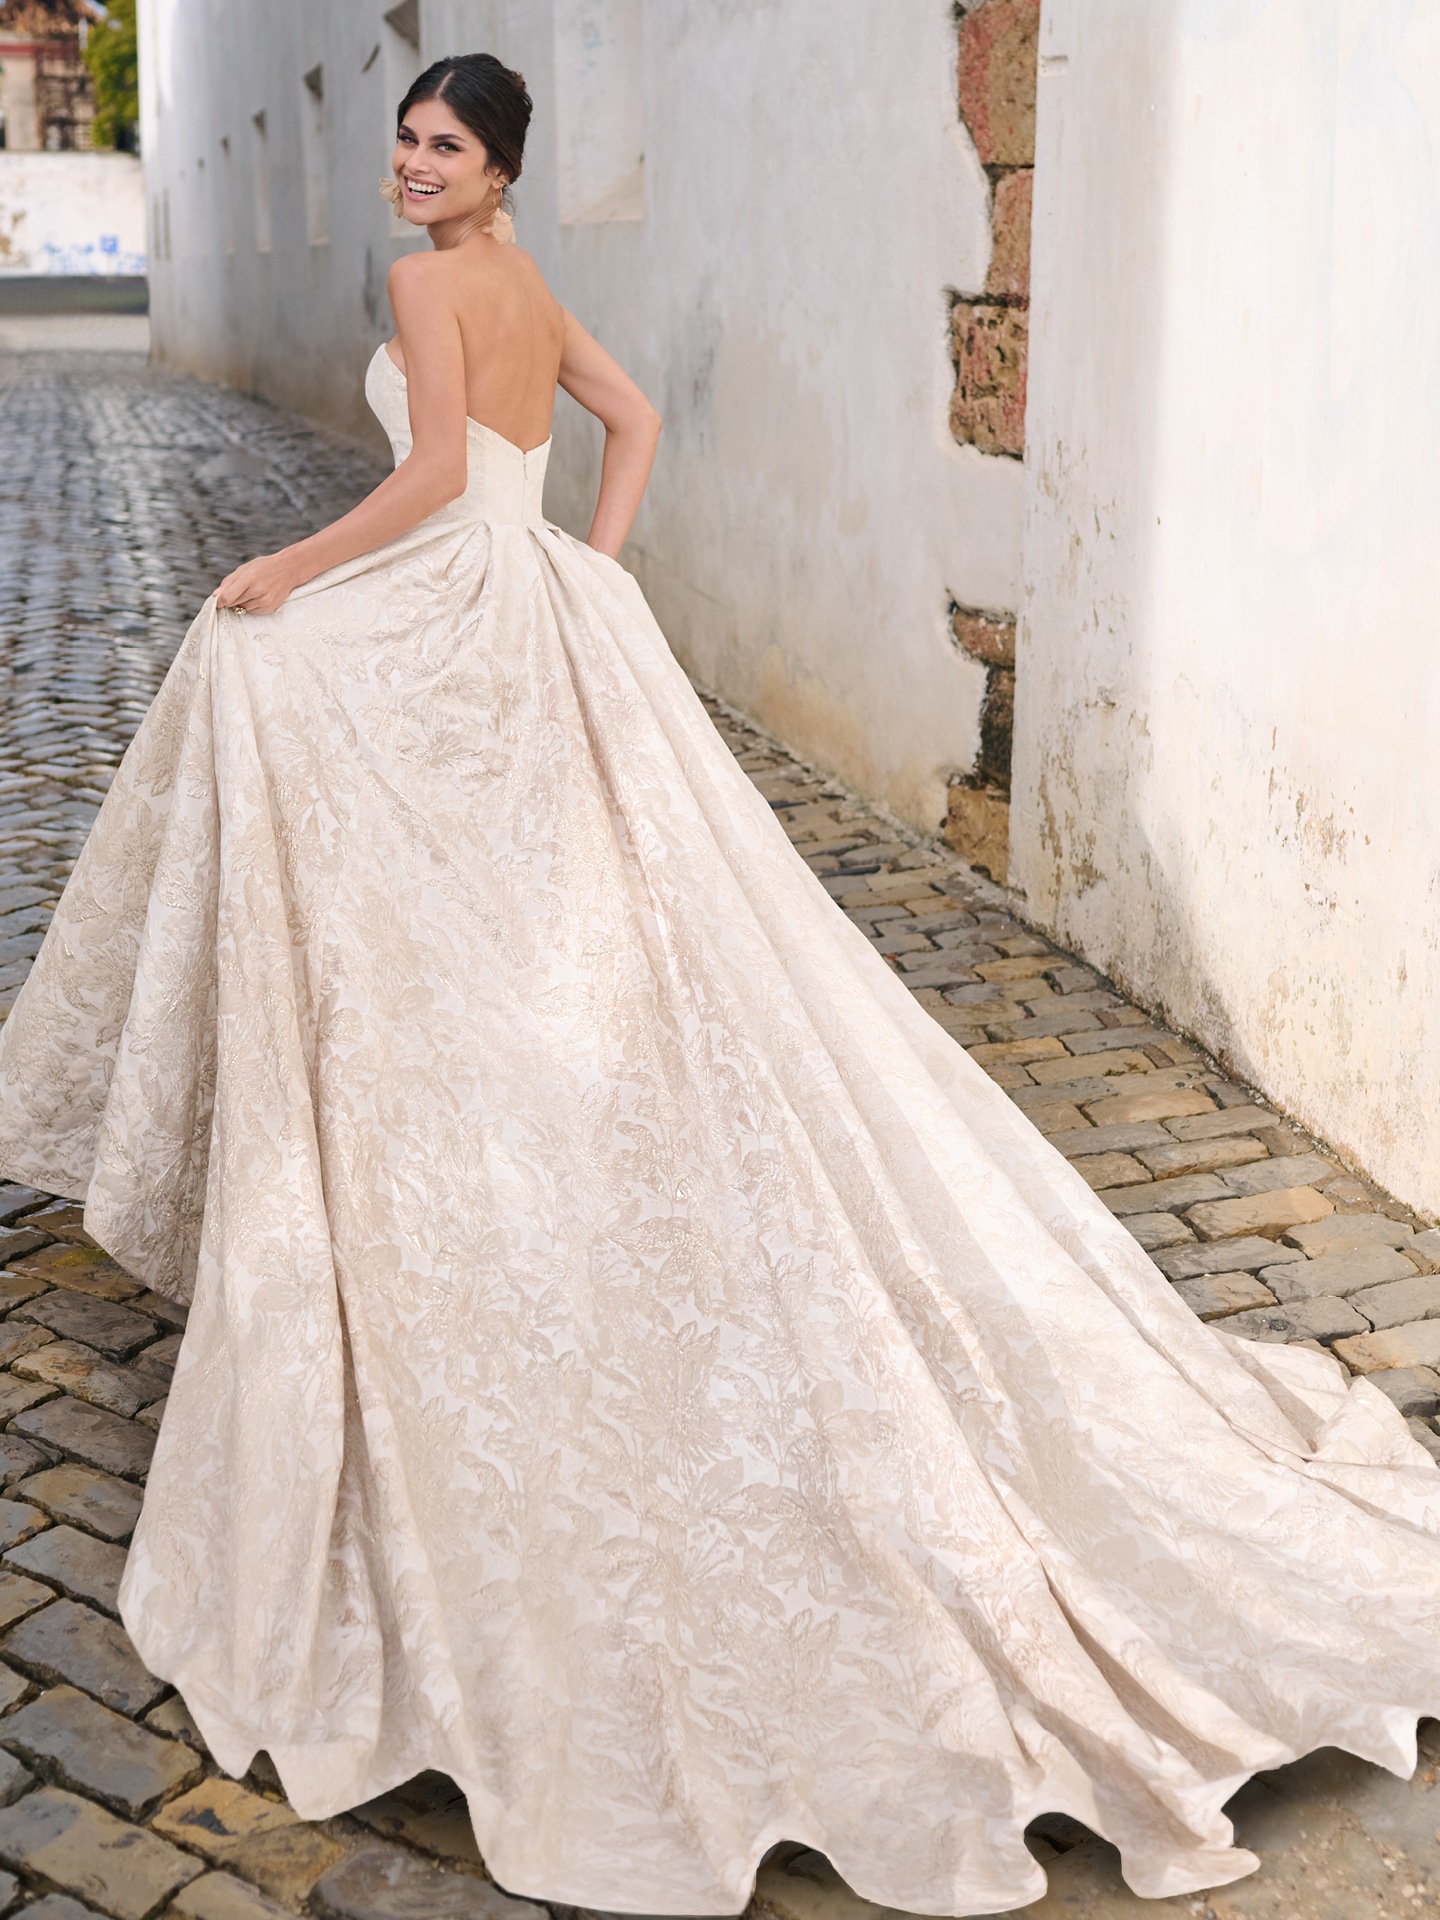 Top 10 wedding dress designers for a unique look on your big day!